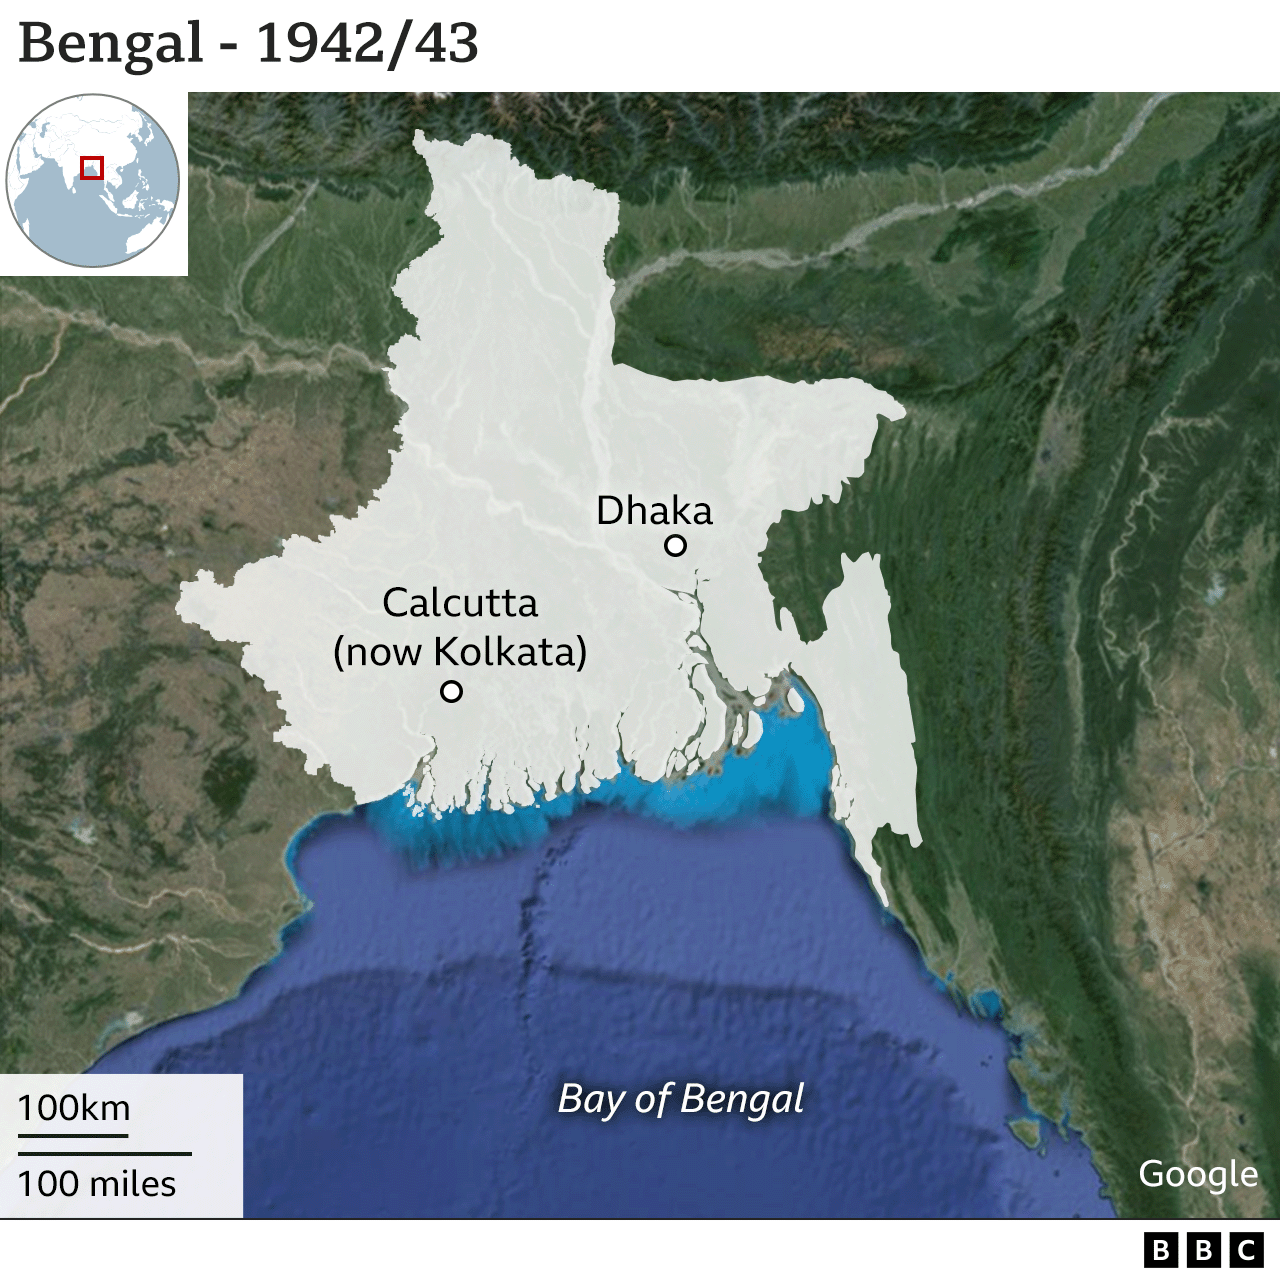 Map of Bengal as it was in 1943